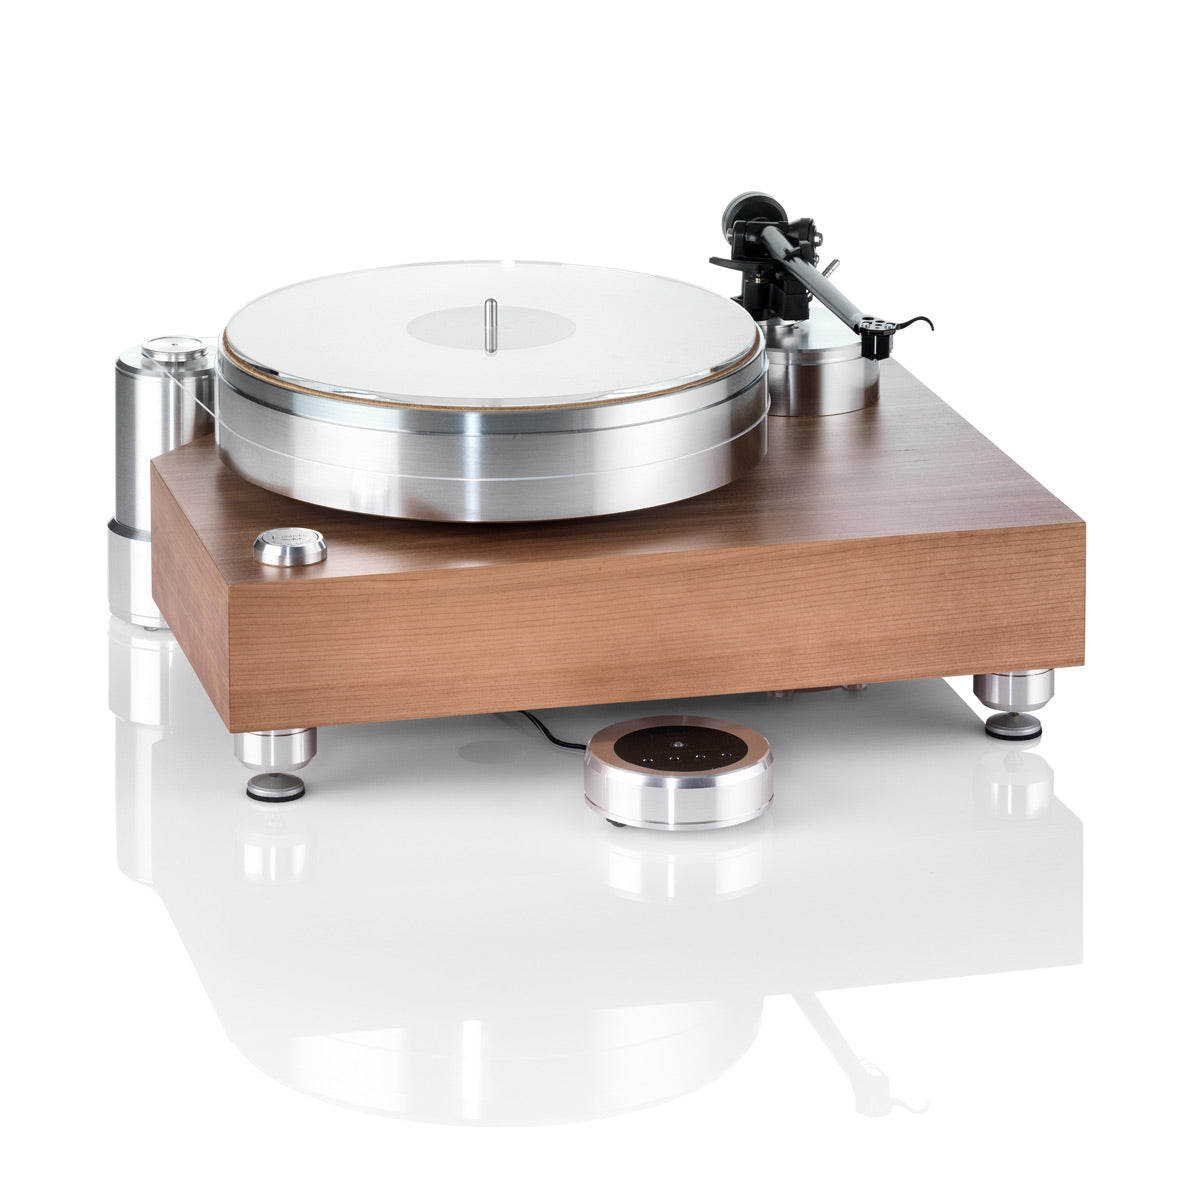 ACOUSTIC SOLID - SOLID WOOD TURNTABLE - Experience a listening pleasure in perfection with the High-quality technology and acoustics with Acoustic Solid. Best price at Vinyl Sound for all Acoustic Solid Turntables, Cartridges, tonearms and Phono Amplifiers: Acoustic Solid - Solid Brake - Acoustic Solid - Solid Machine – Acoustic Solid - Solid Edition – Acoustic Solid - Solid Royal – Acoustic Solid - Solid Stand